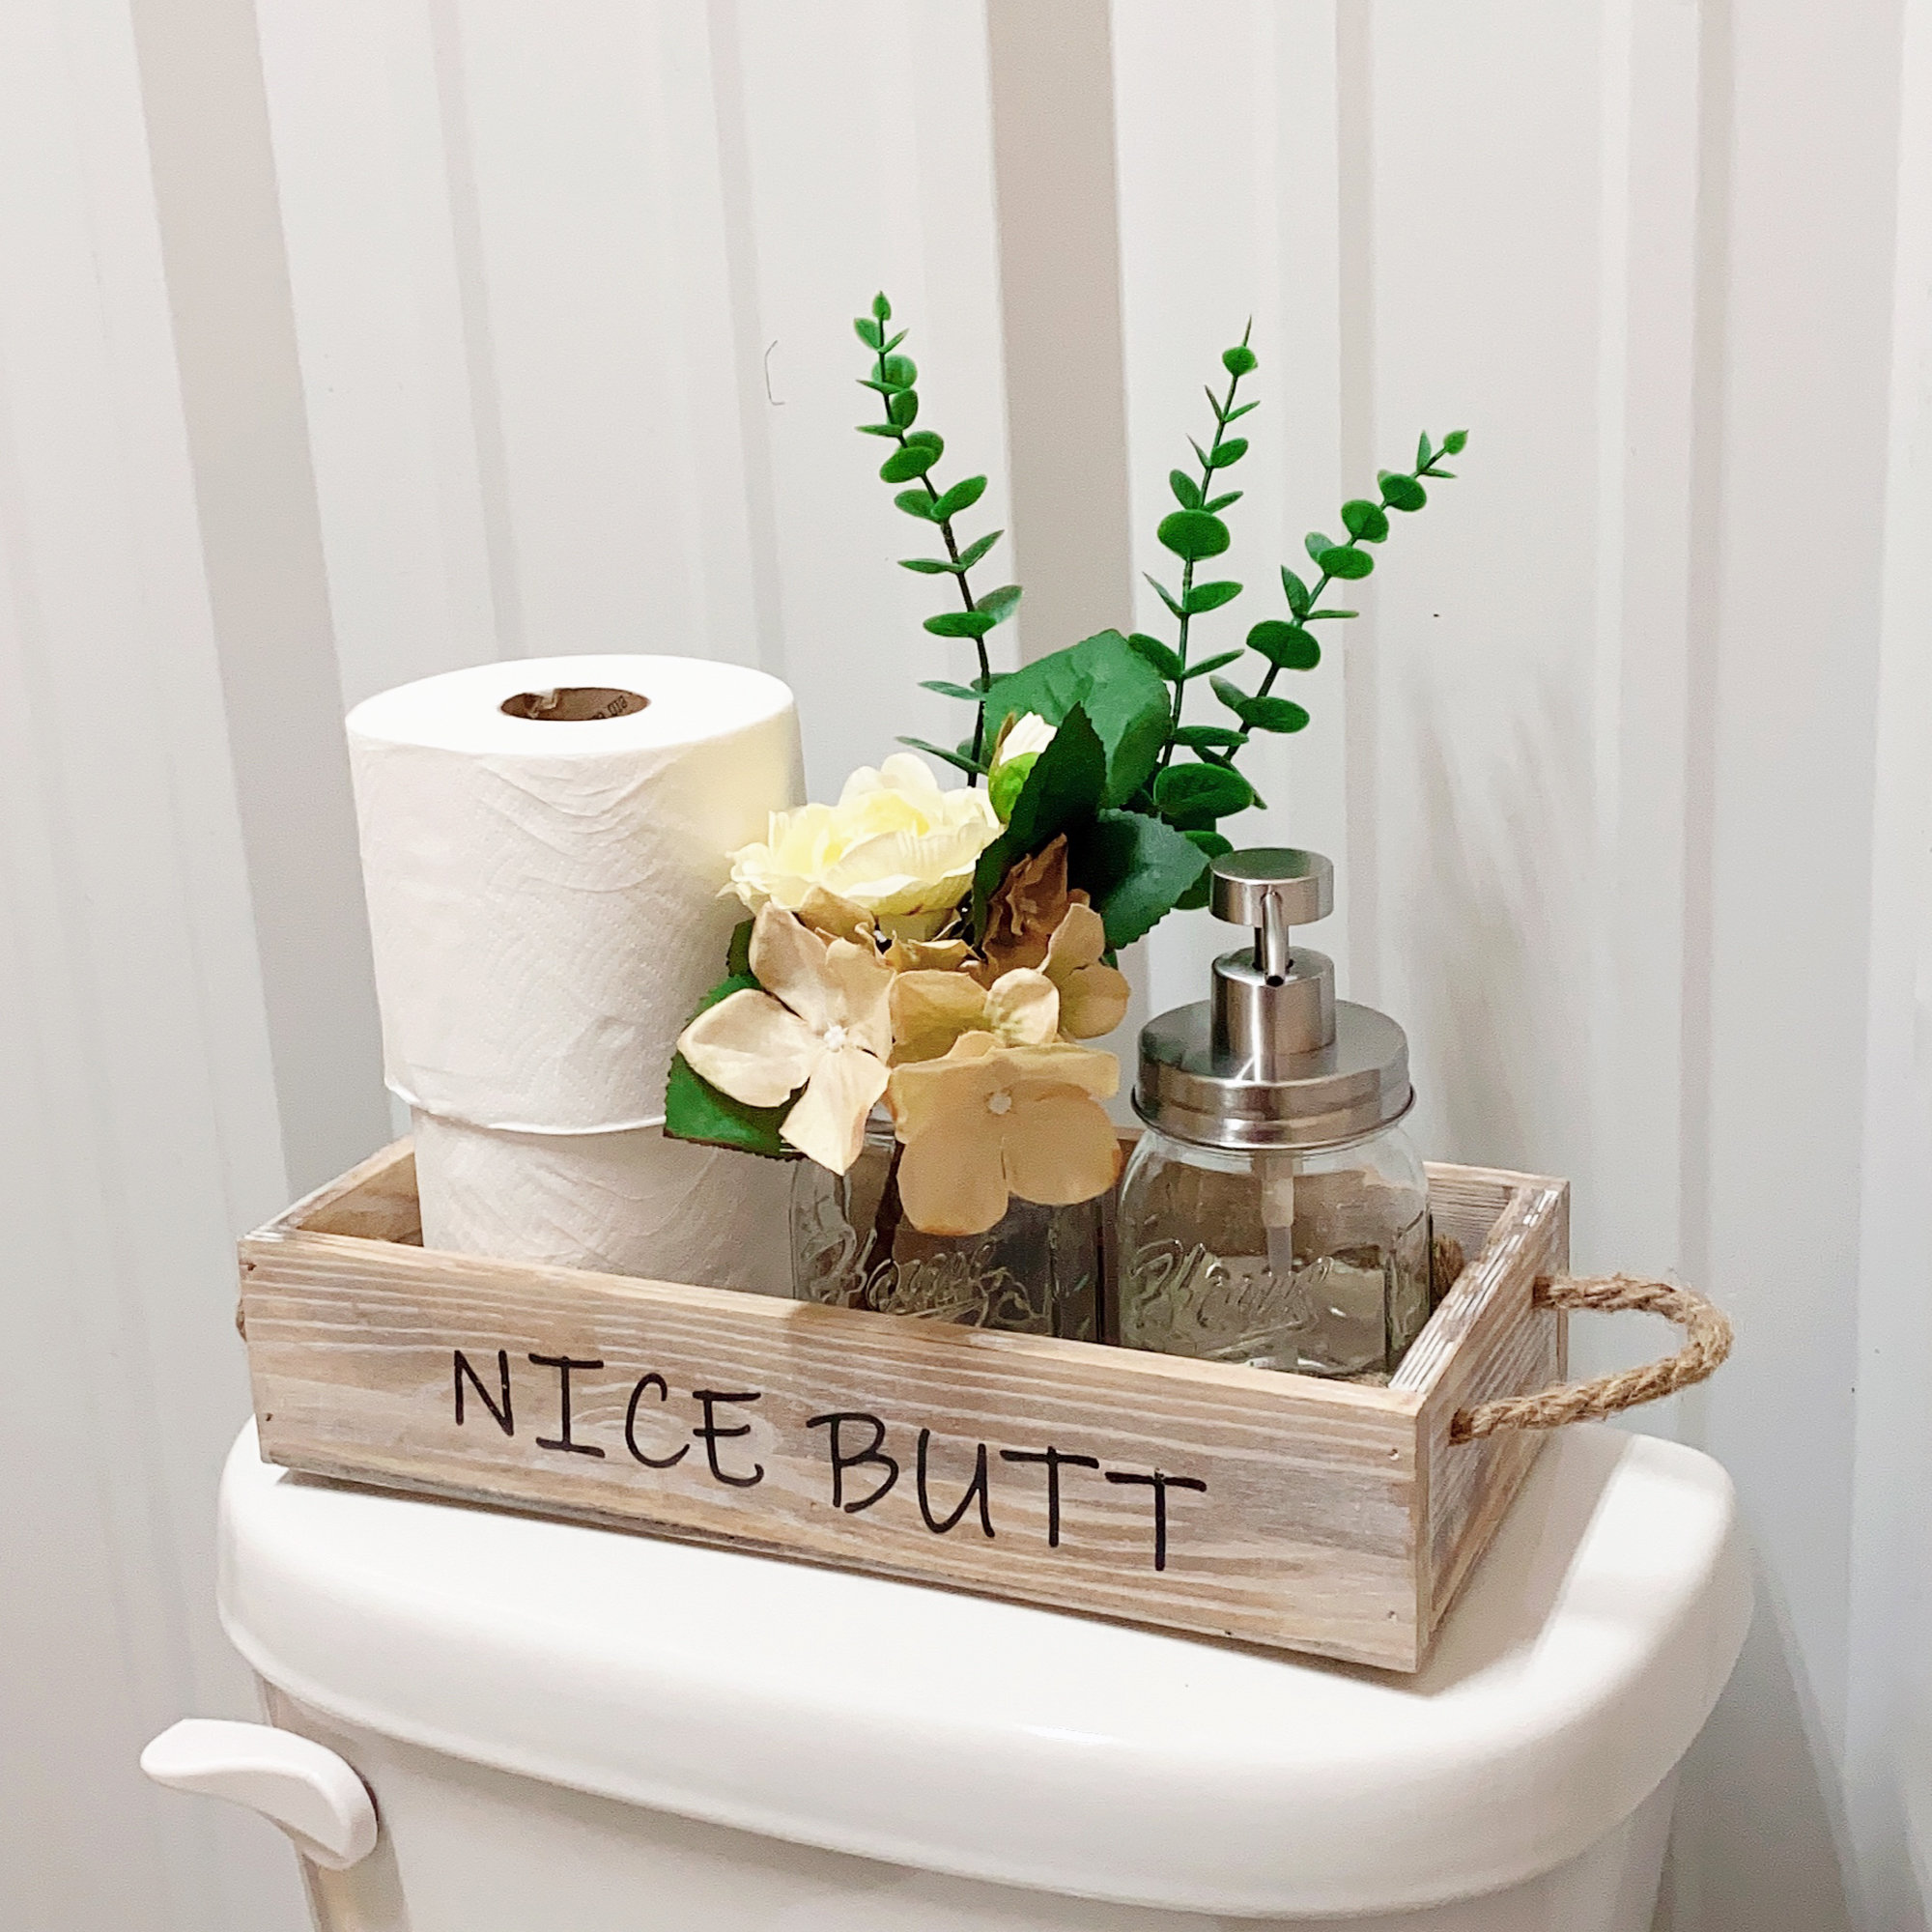 10 toilet accessories that make the bathroom a more pleasant place